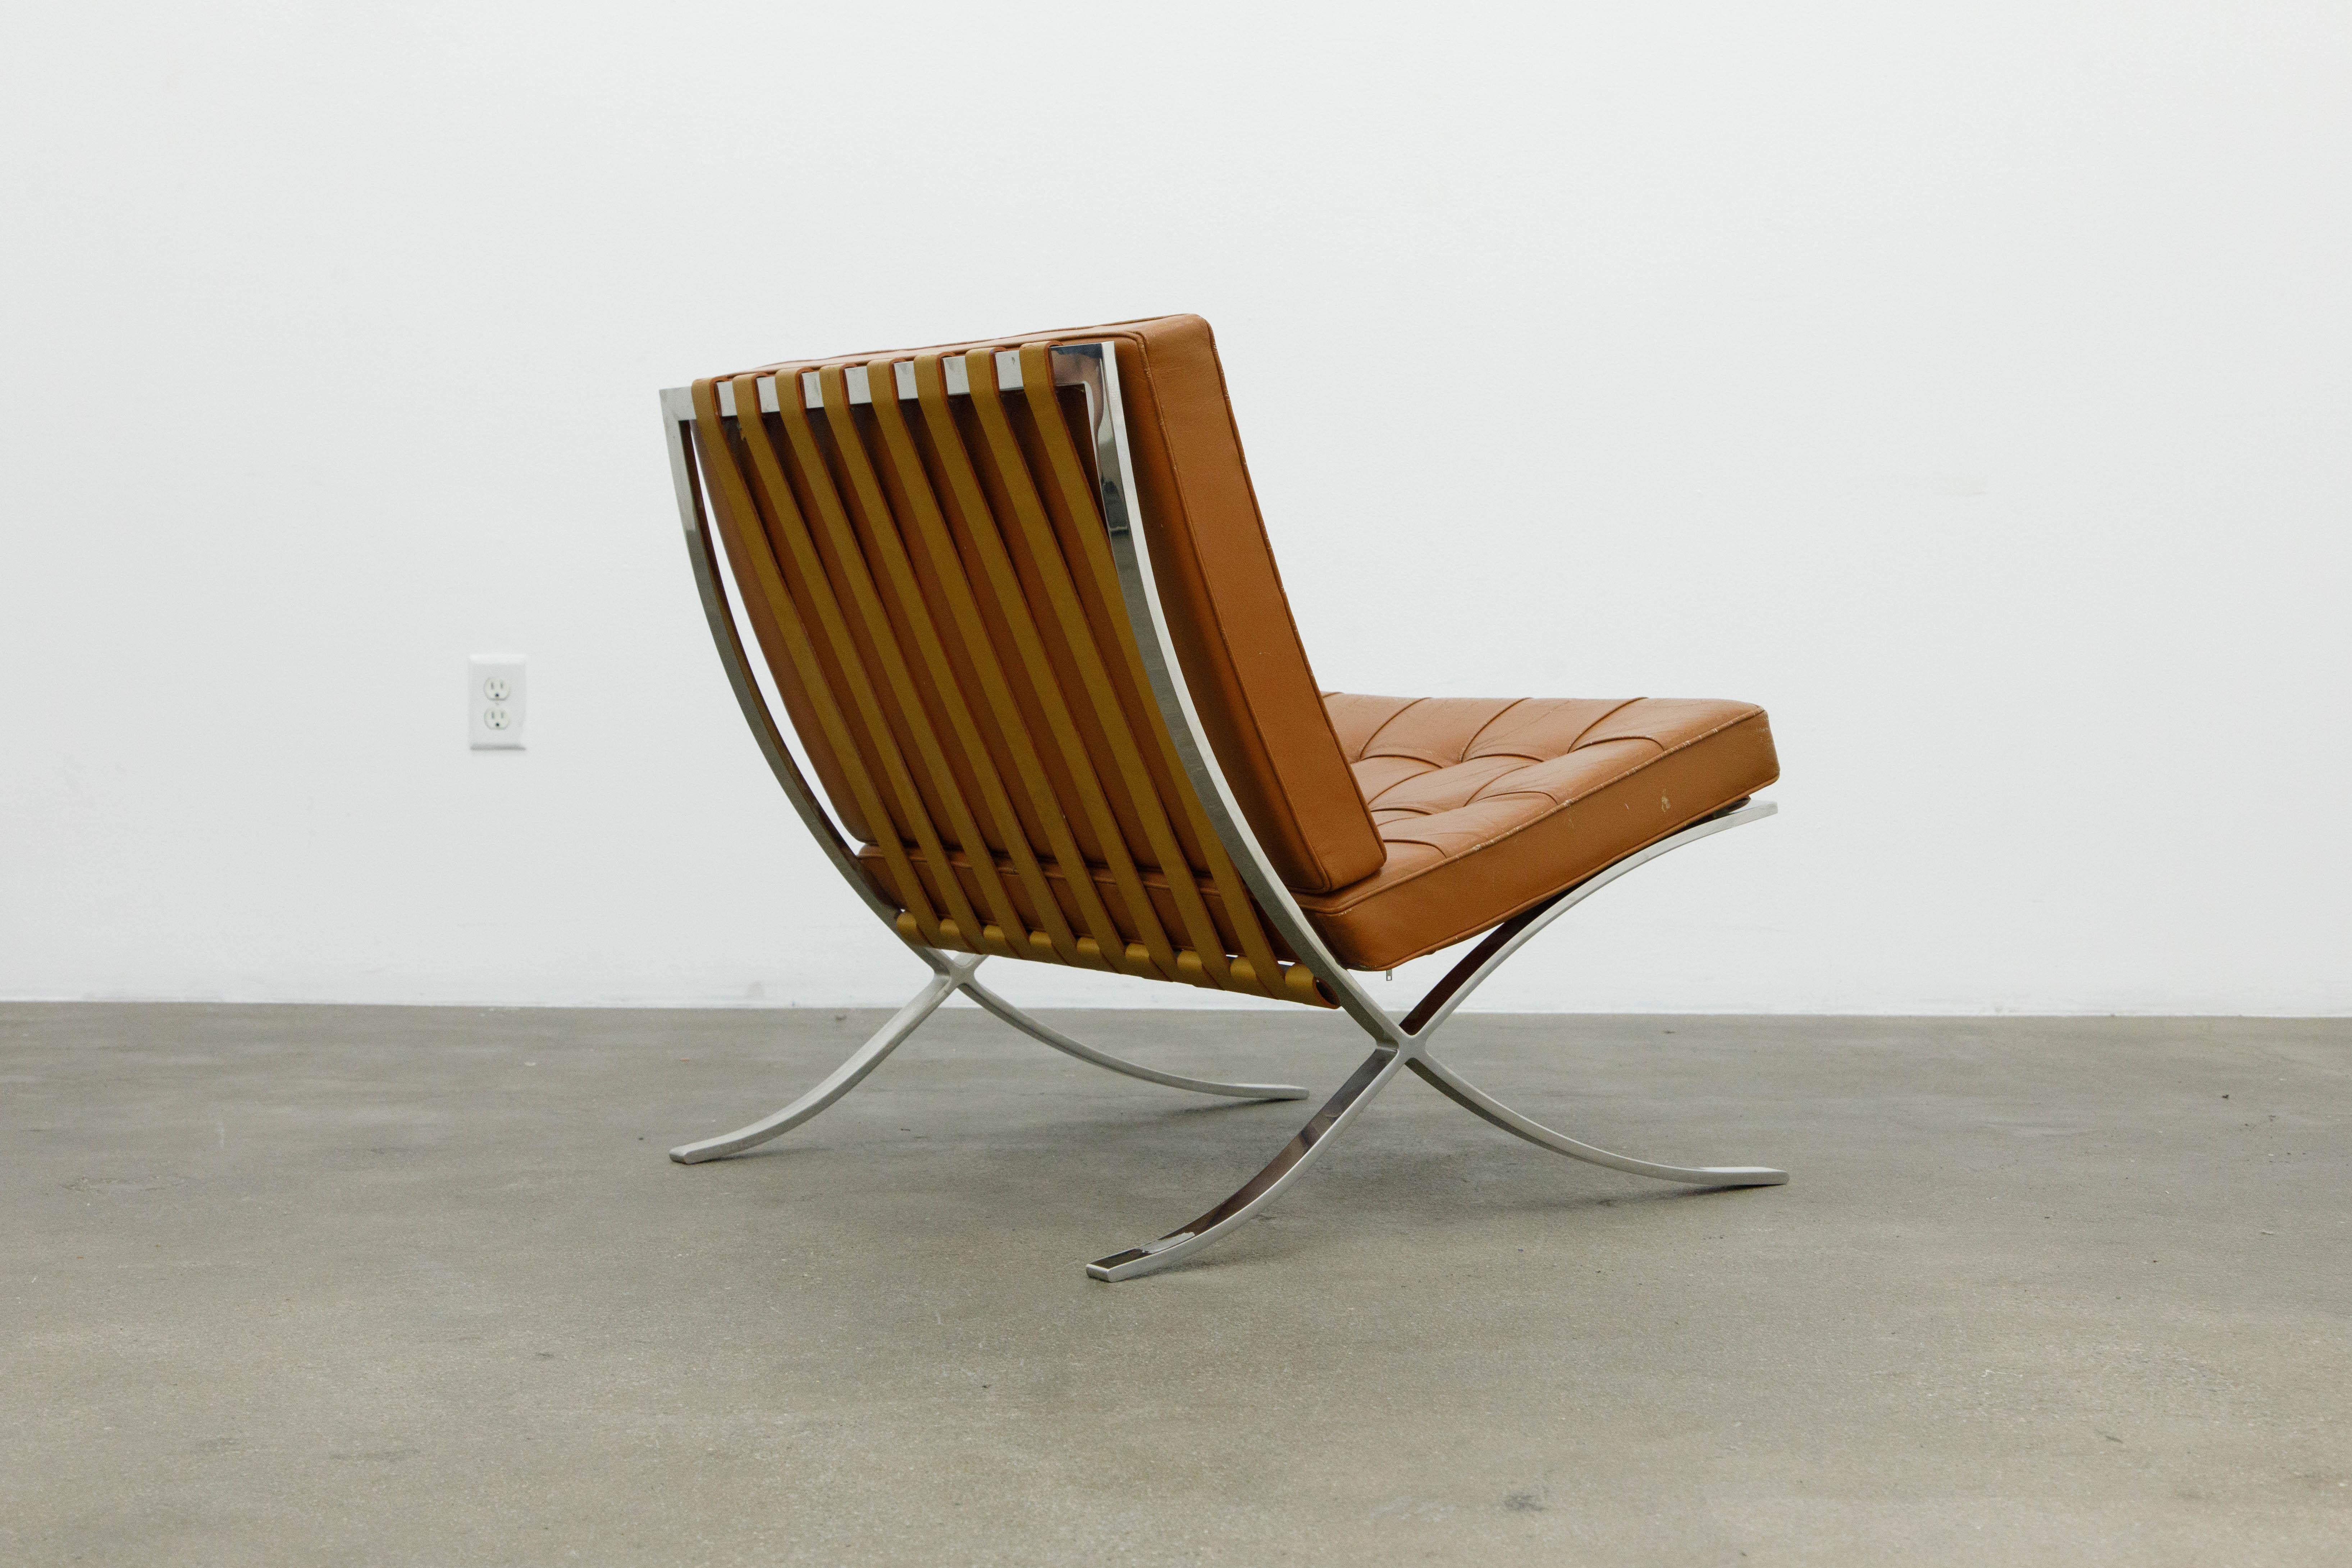 Stainless Steel Knoll International Barcelona Lounge Chair by Mies Van Der Rohe, c. 1970, Signed